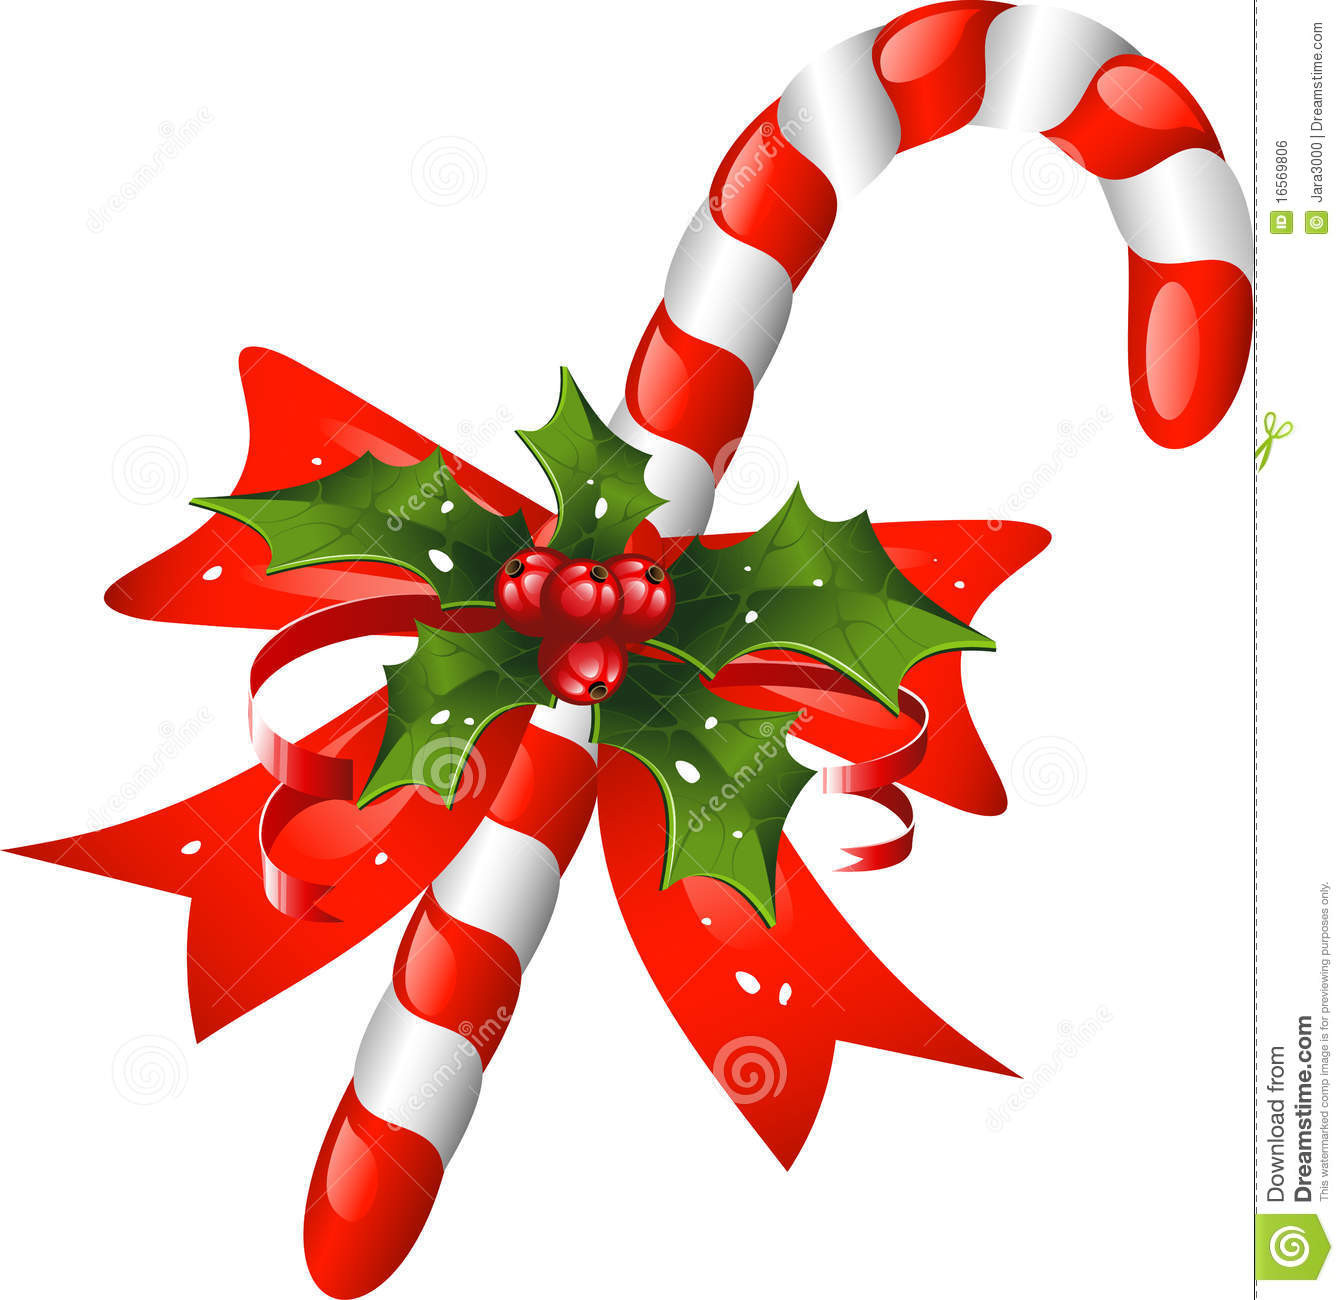 Christmas Candy Cane Images
 Christmas Candy Cane Decorated With A Bow And Holl Stock